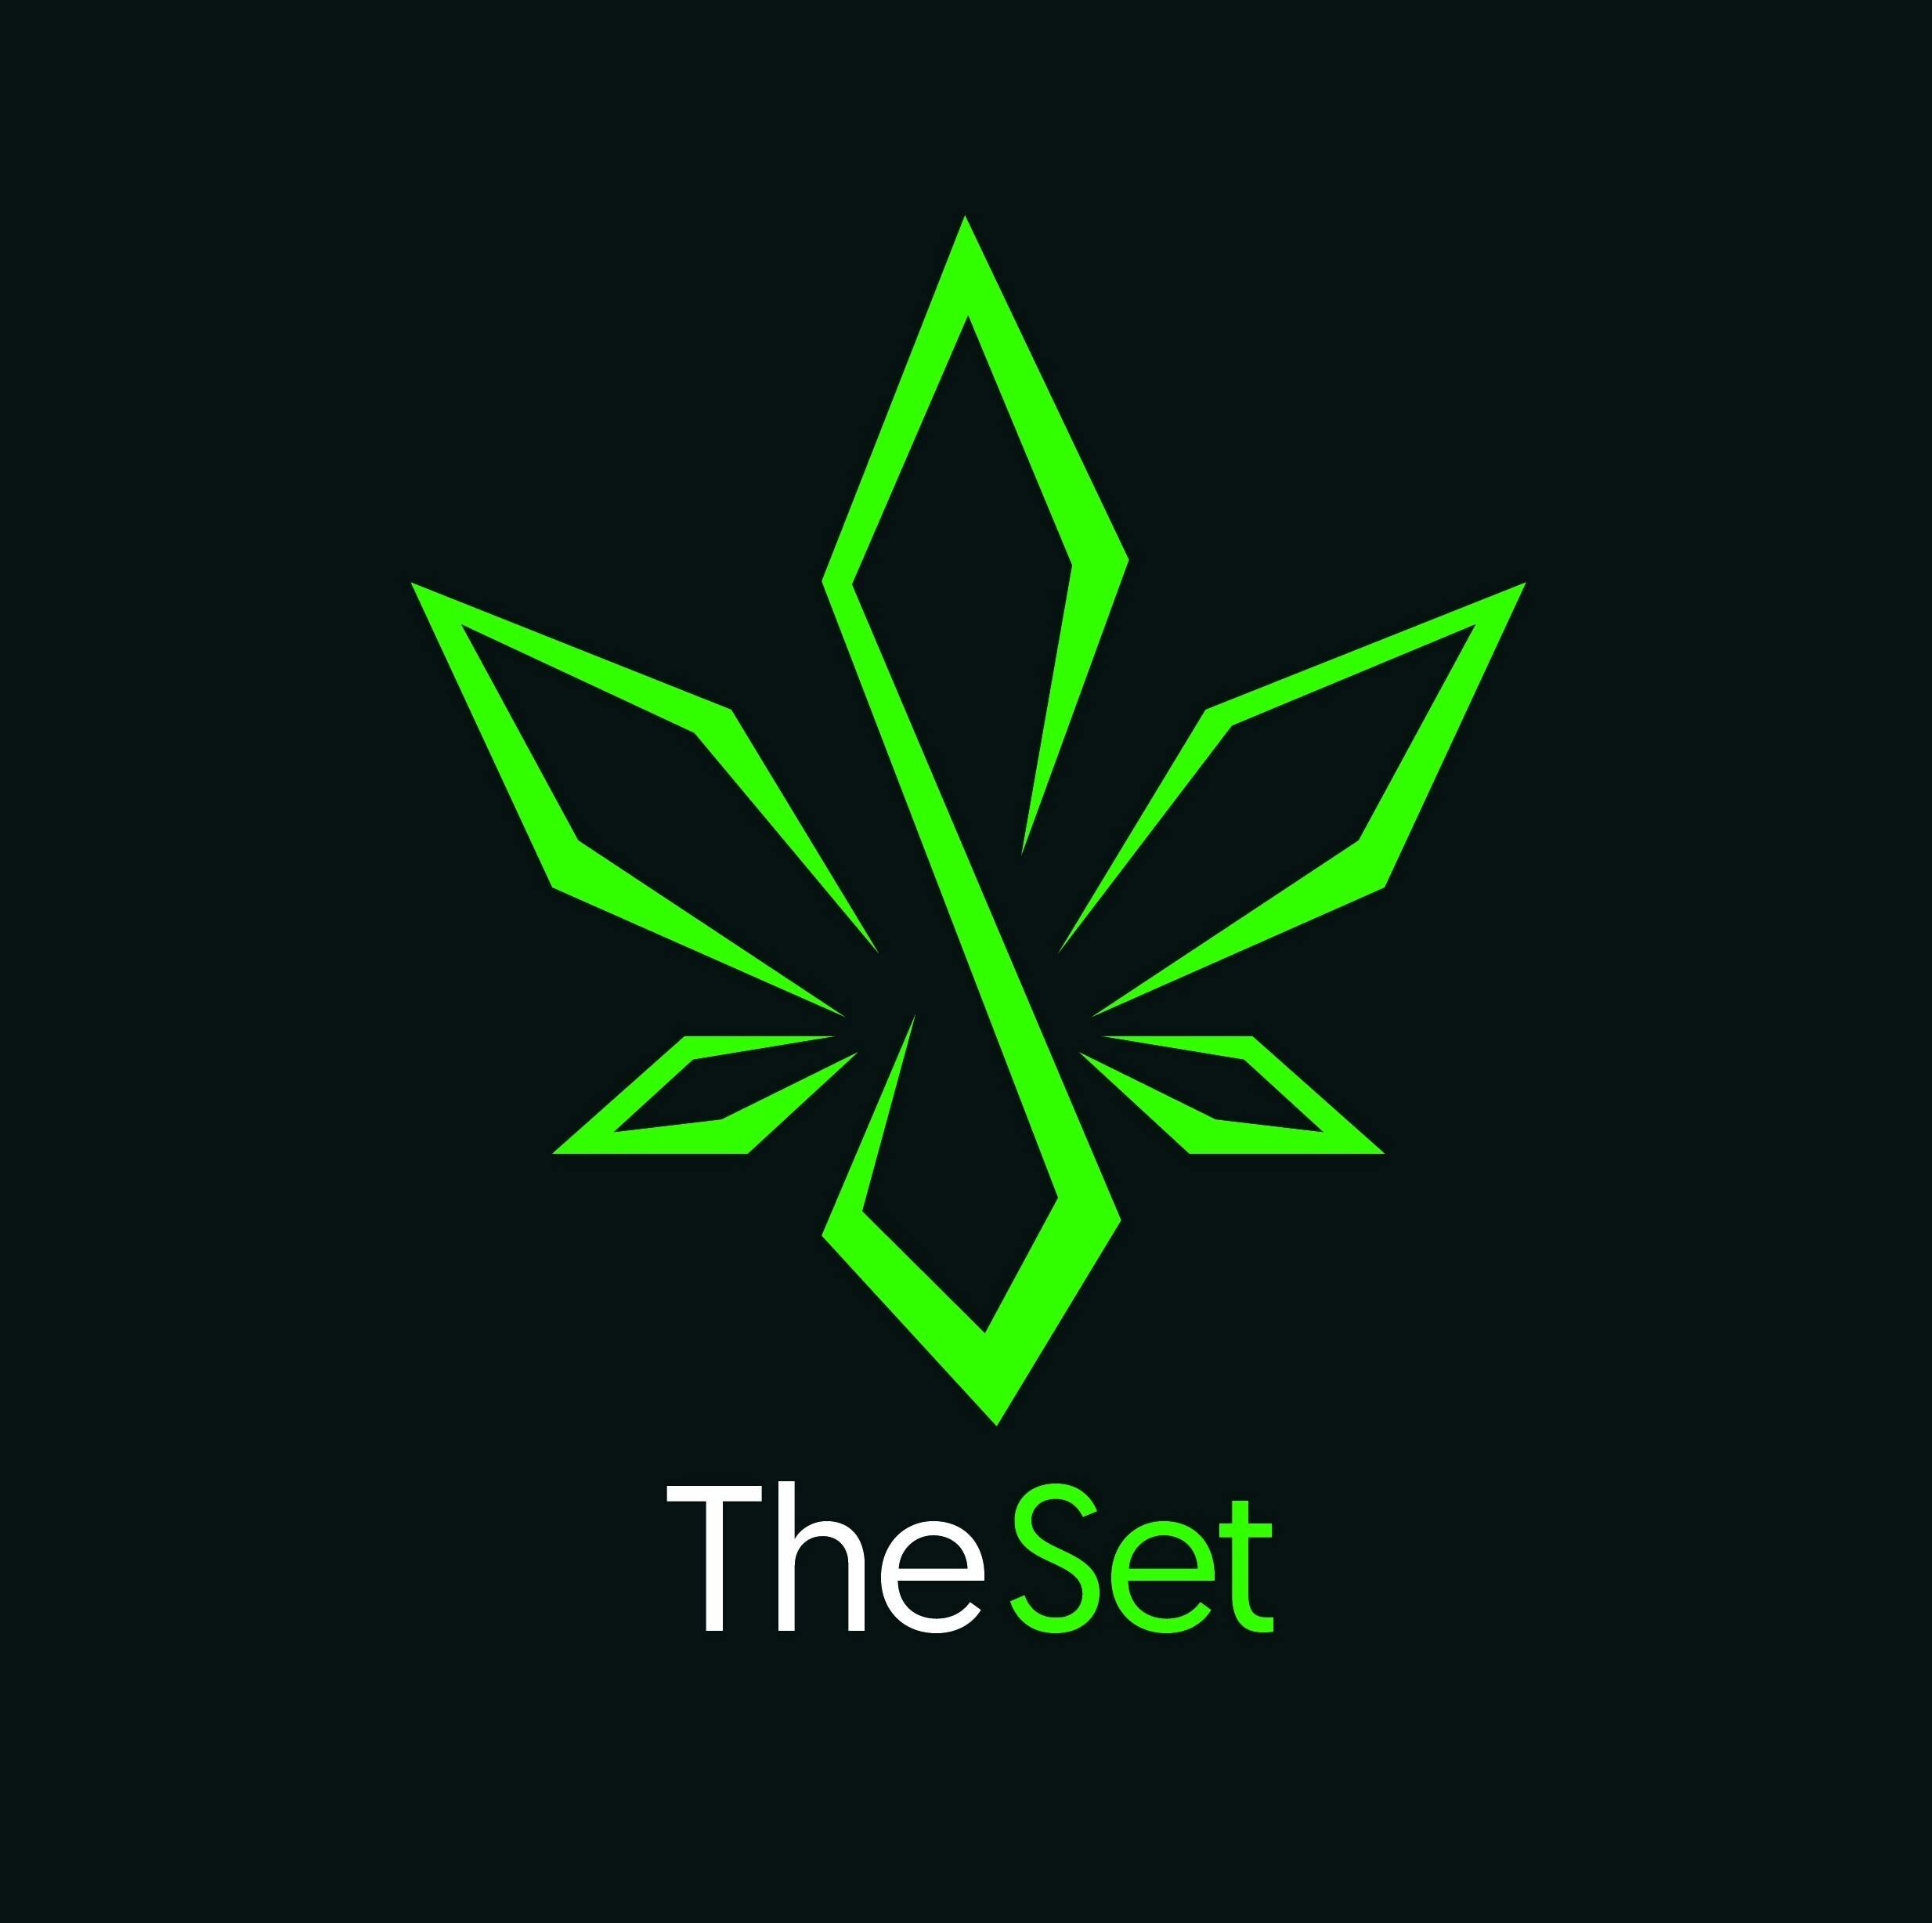 Off The Charts - Dispensary in Reseda logo